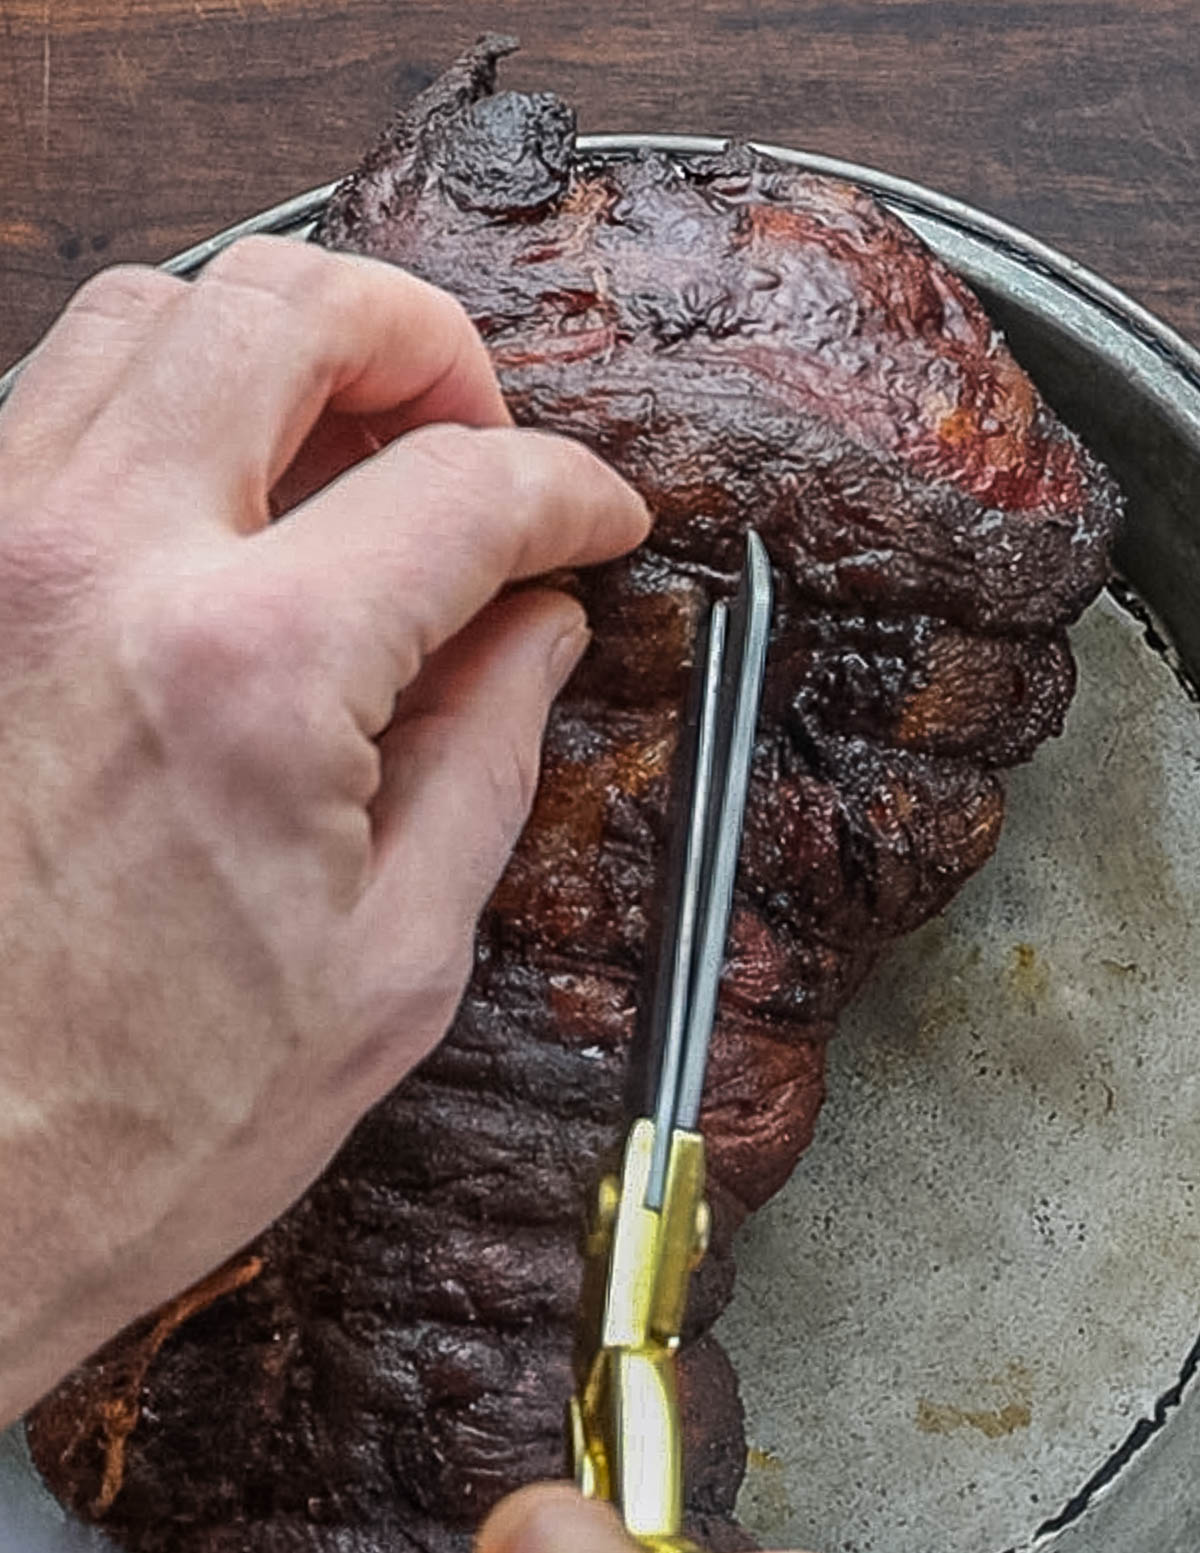 Cutting the twine off of a smoked leg of lamb.